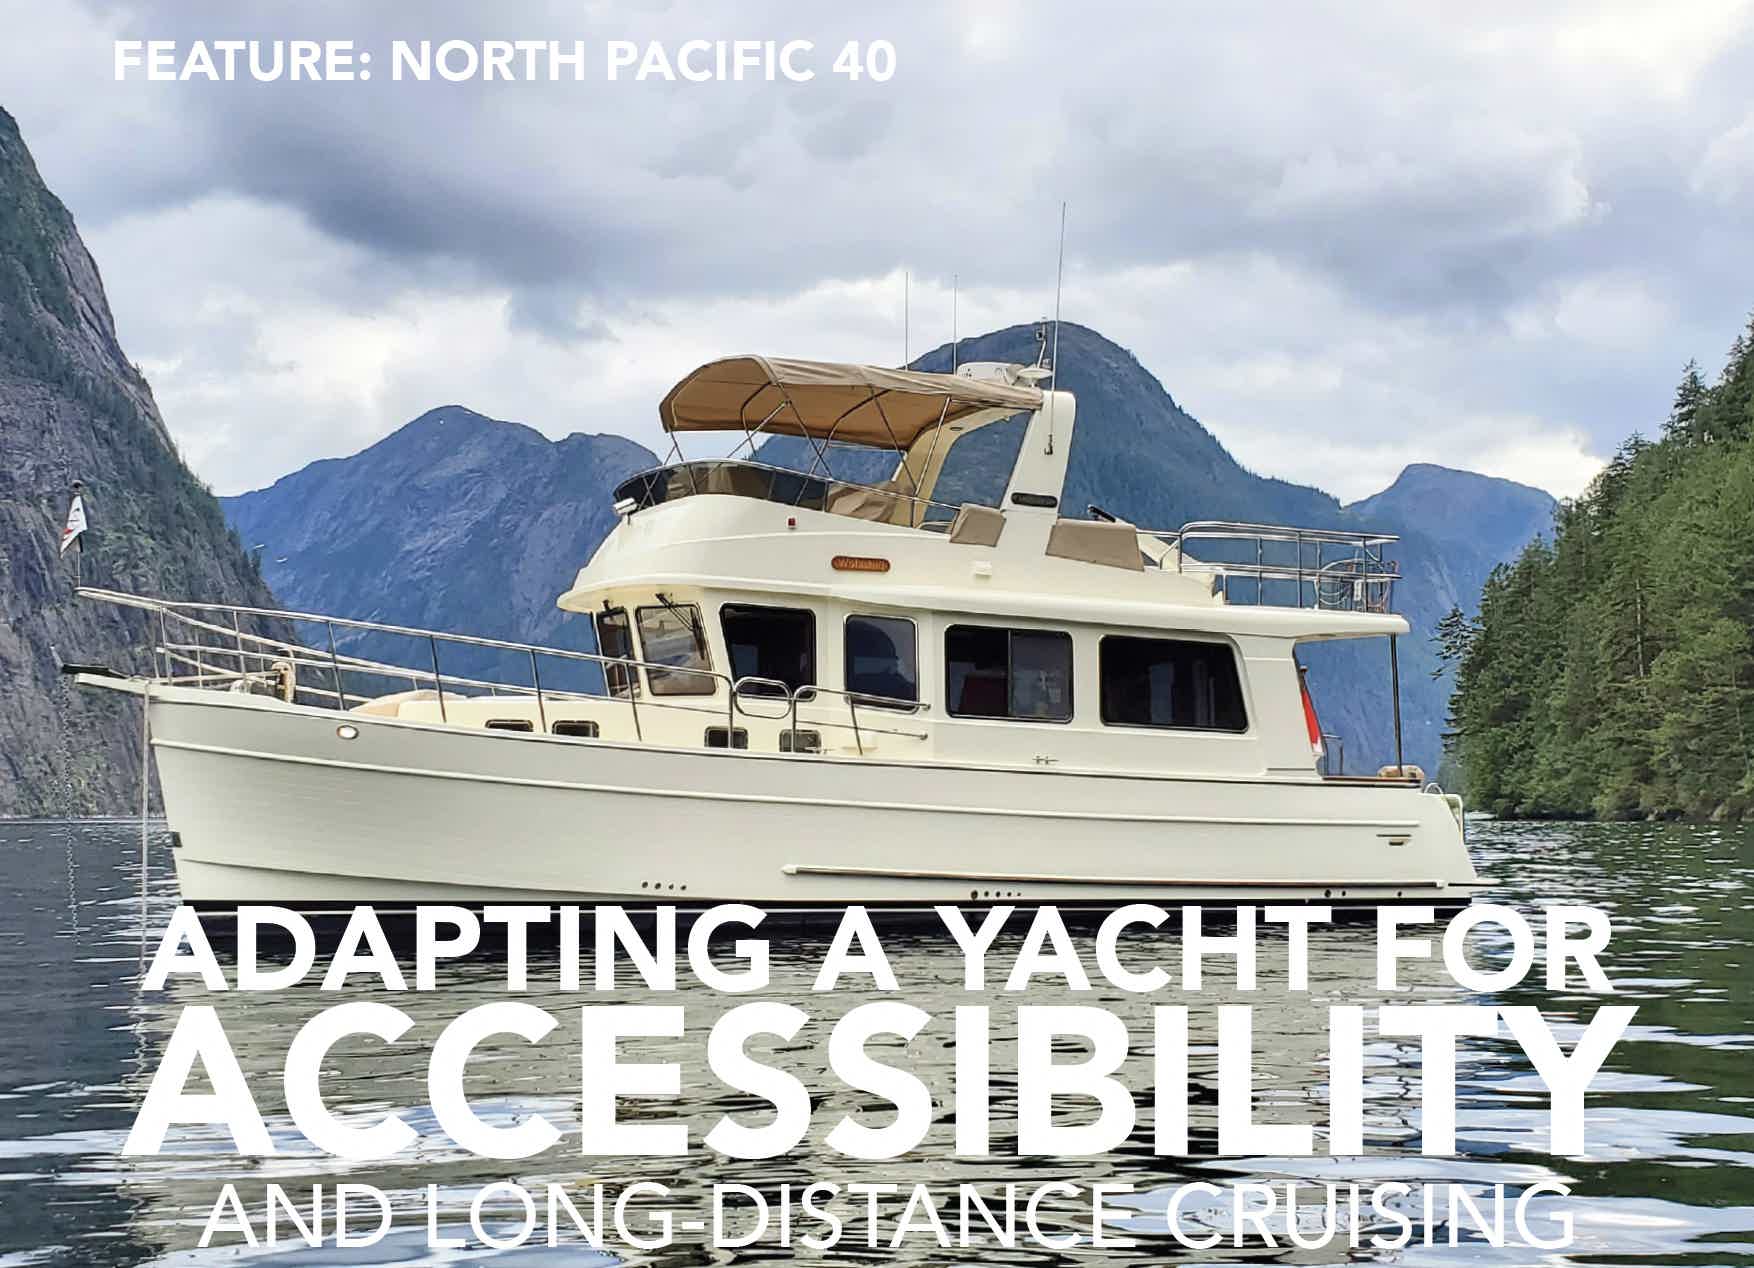 Adapting a Yacht for Accessibility and Long-Distance Cruising